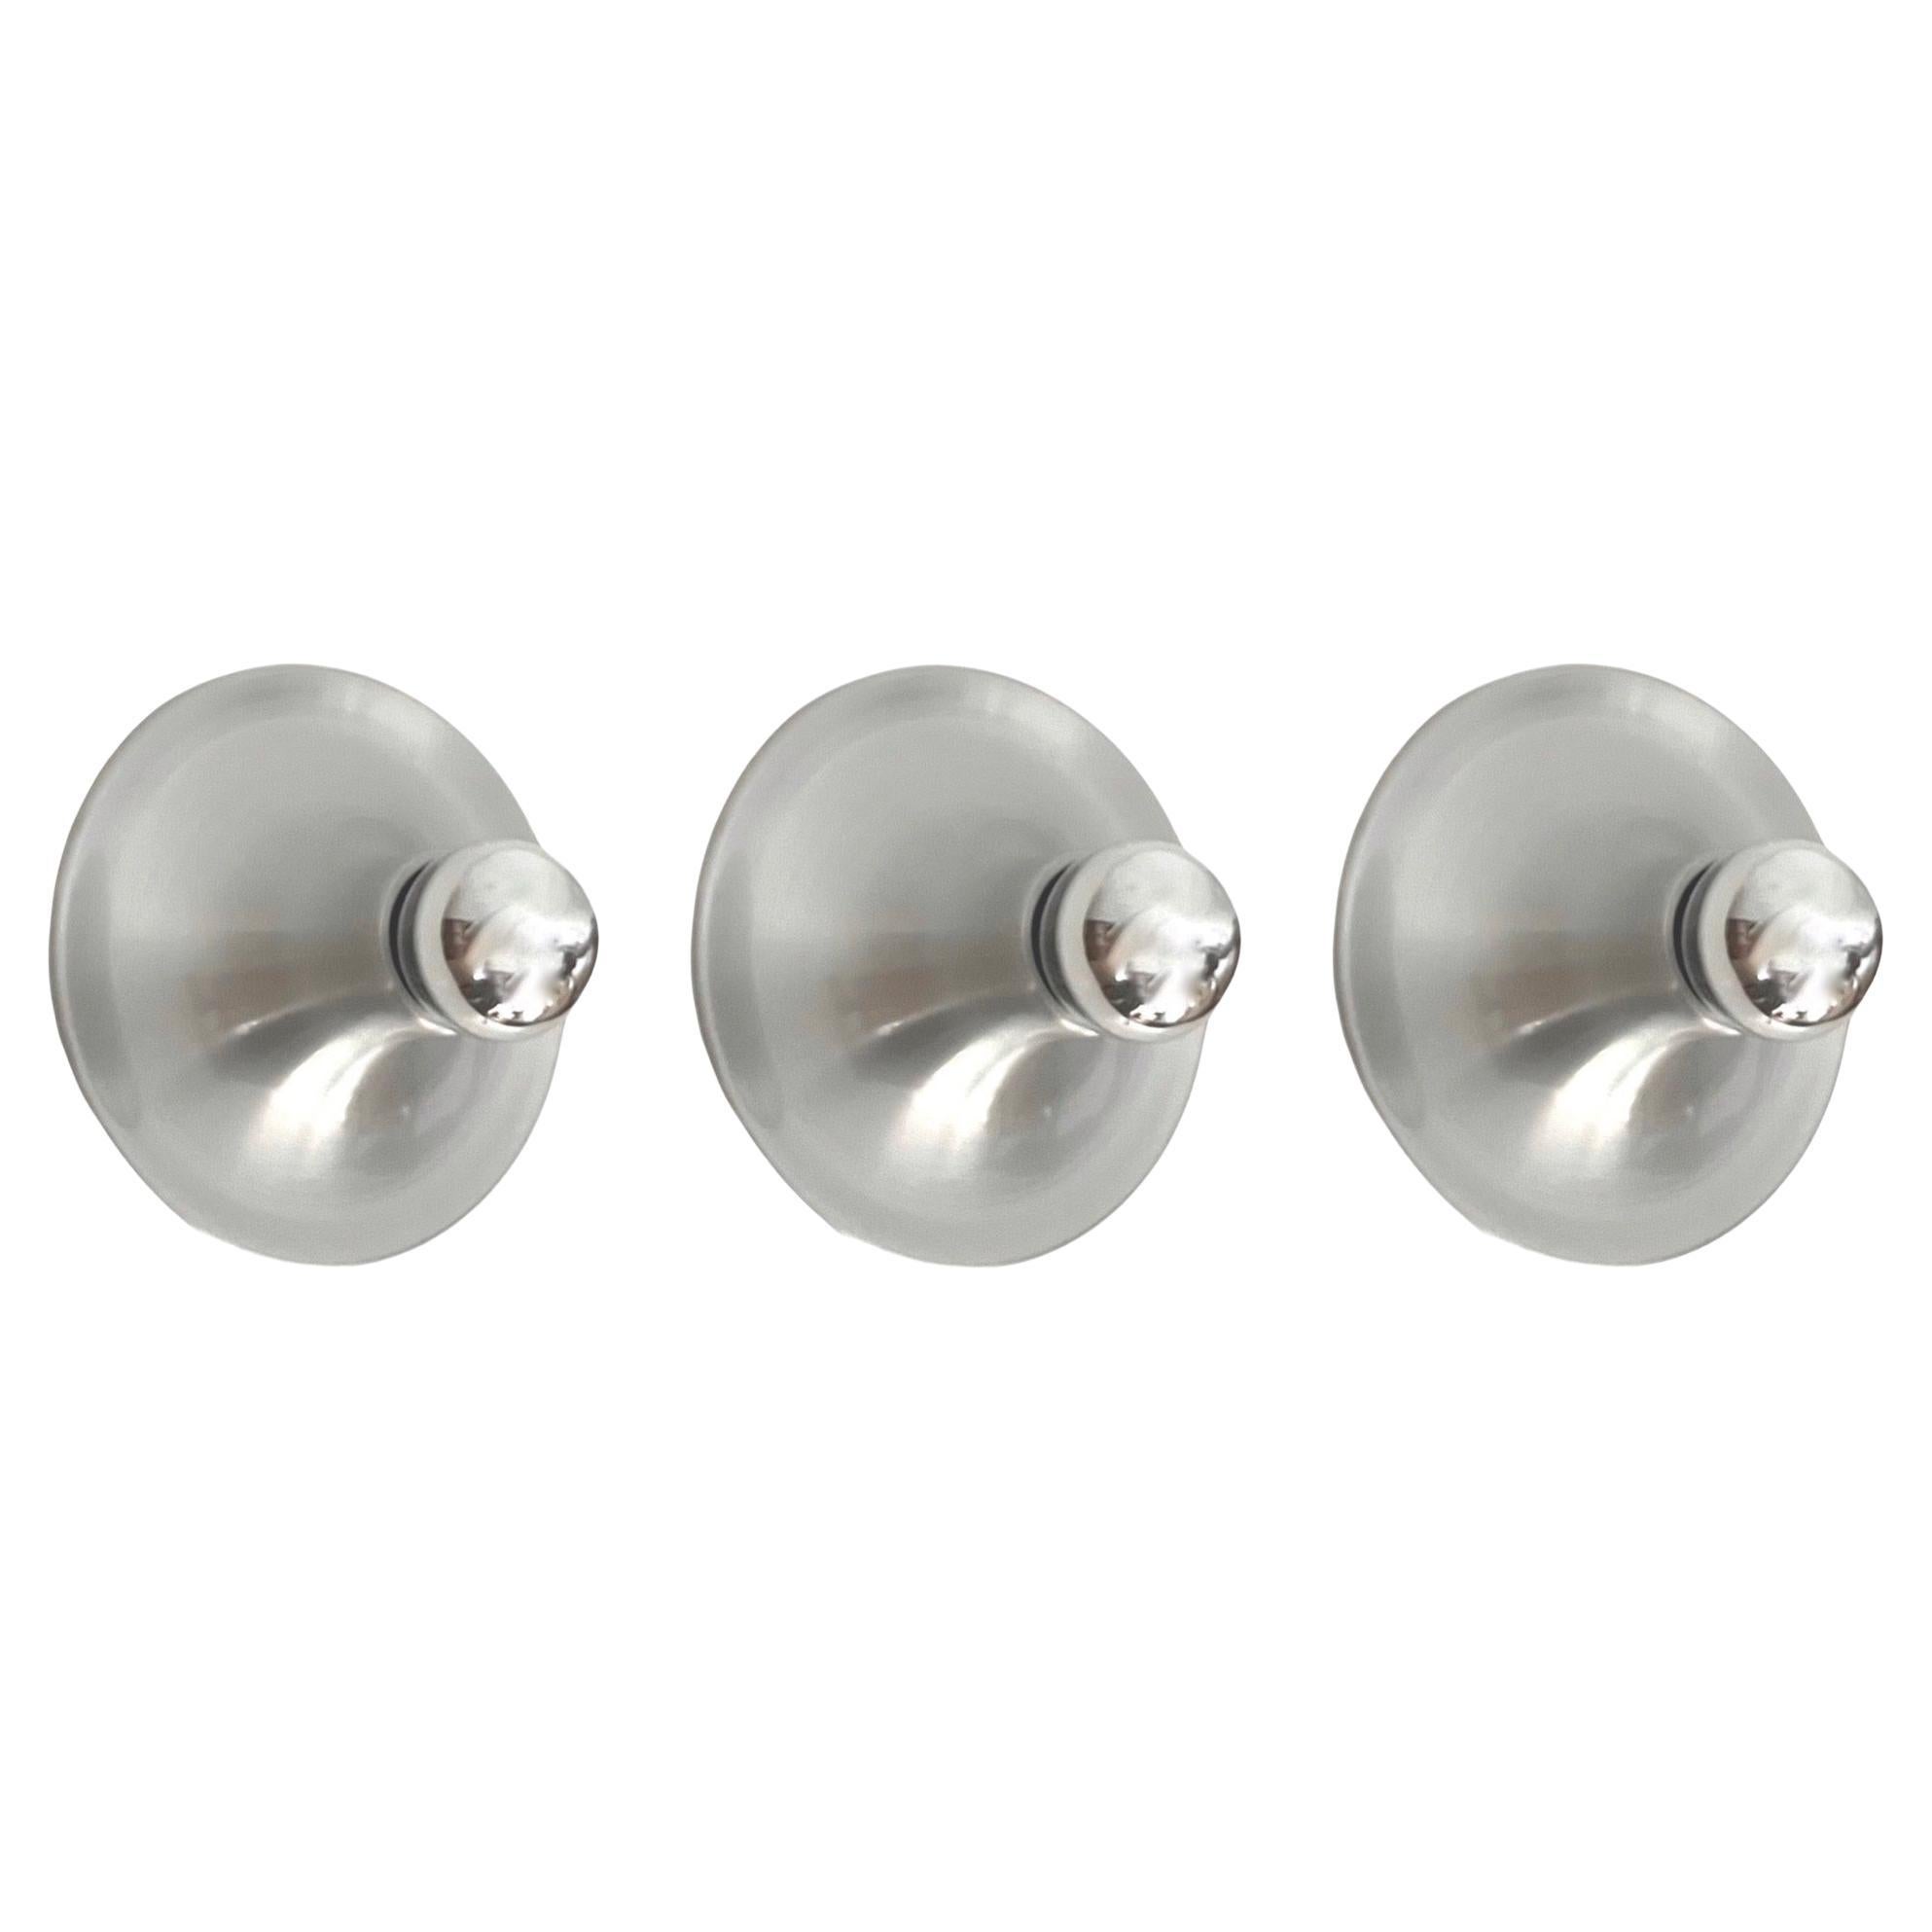 Targetti Sankey Wall Lights and Sconces